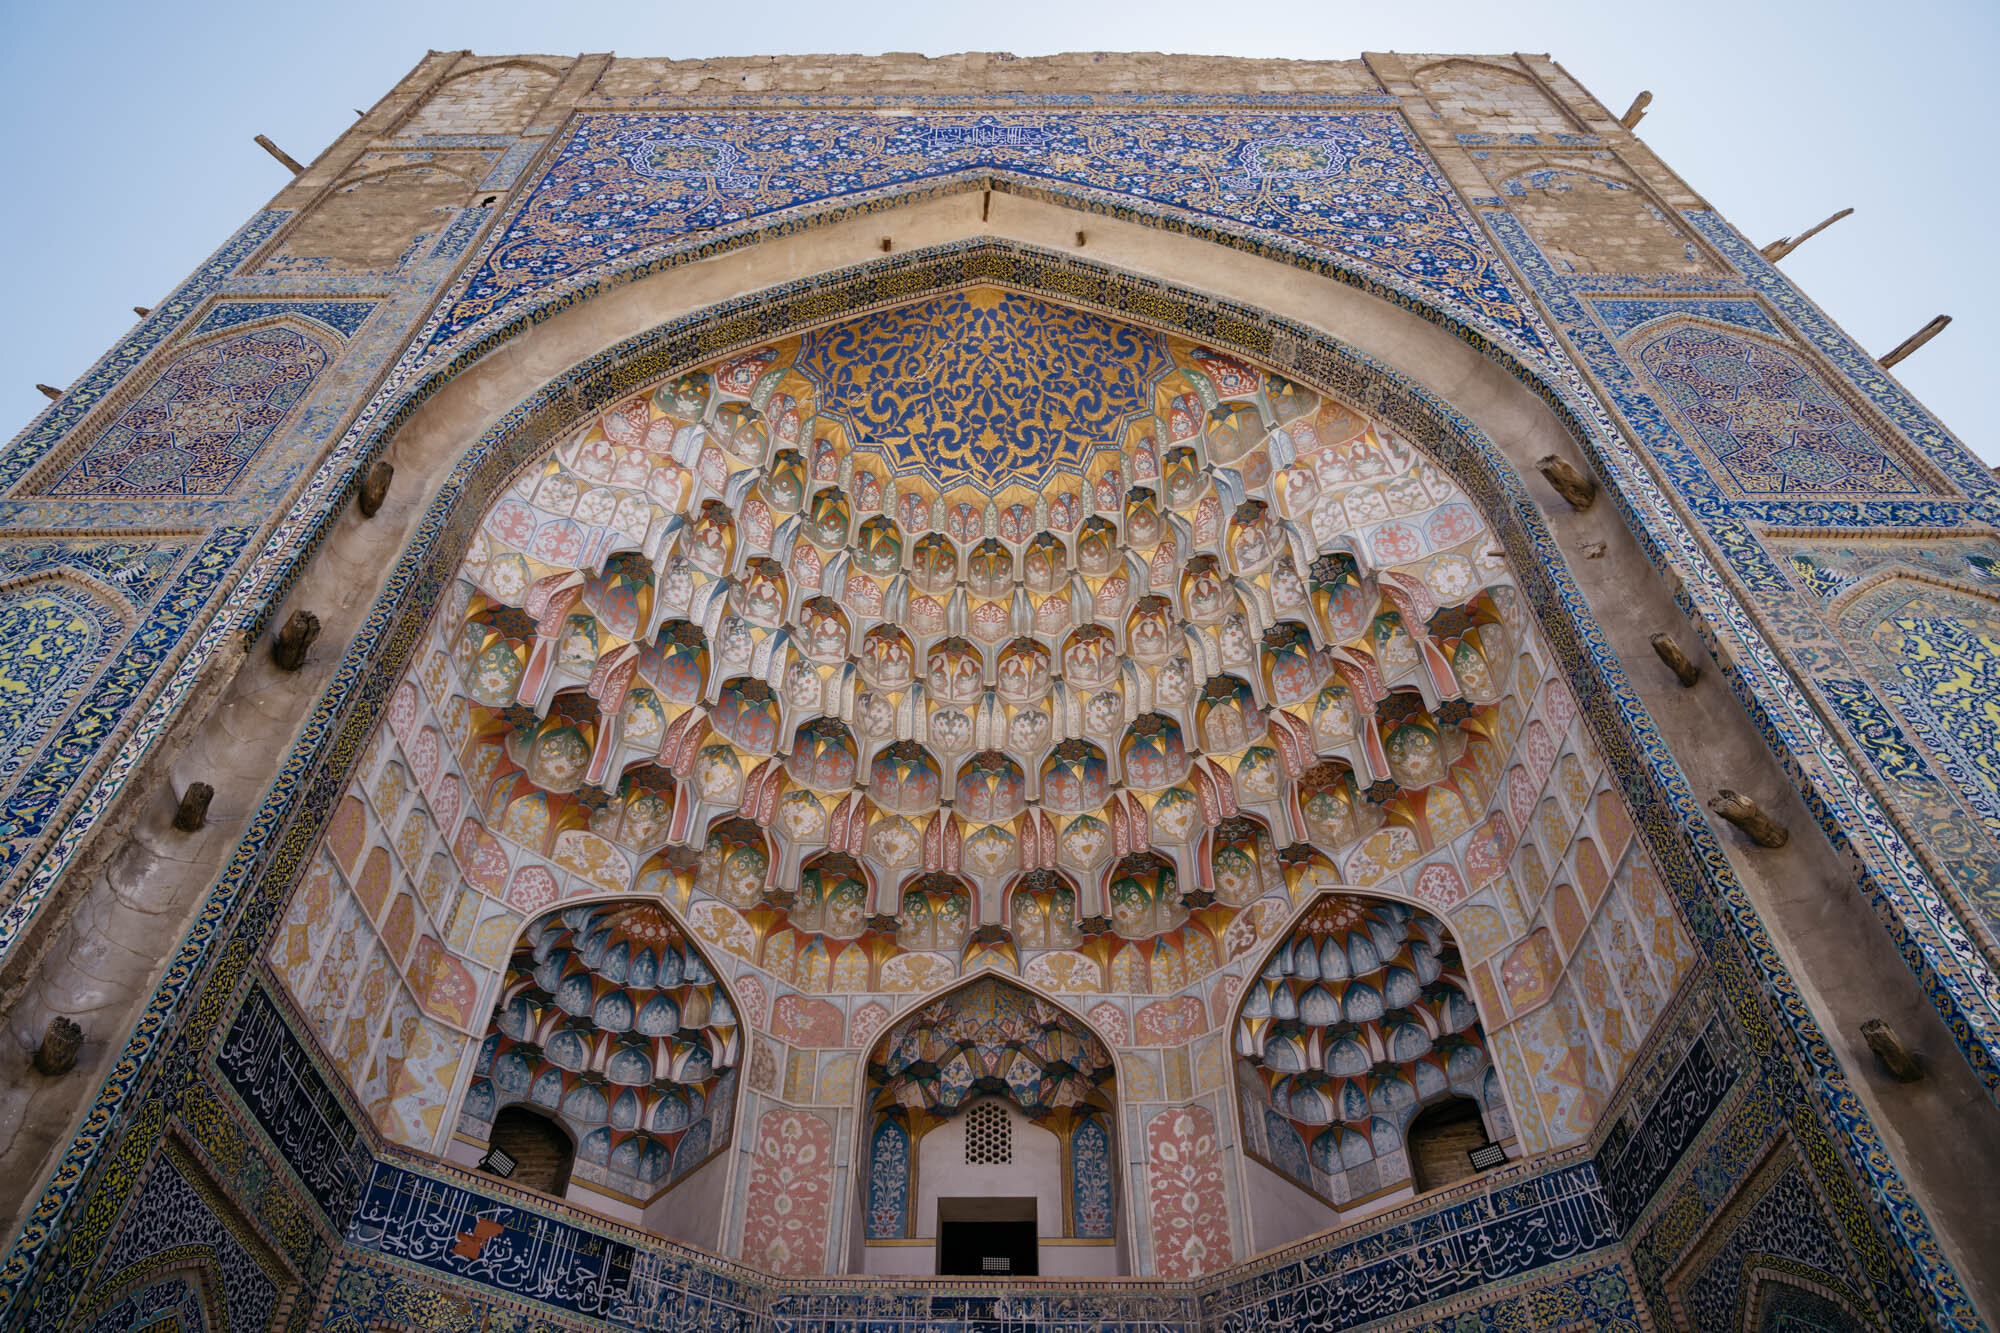  Ceiling details from the Abdullazizkhan Madrassa, Bukhara 